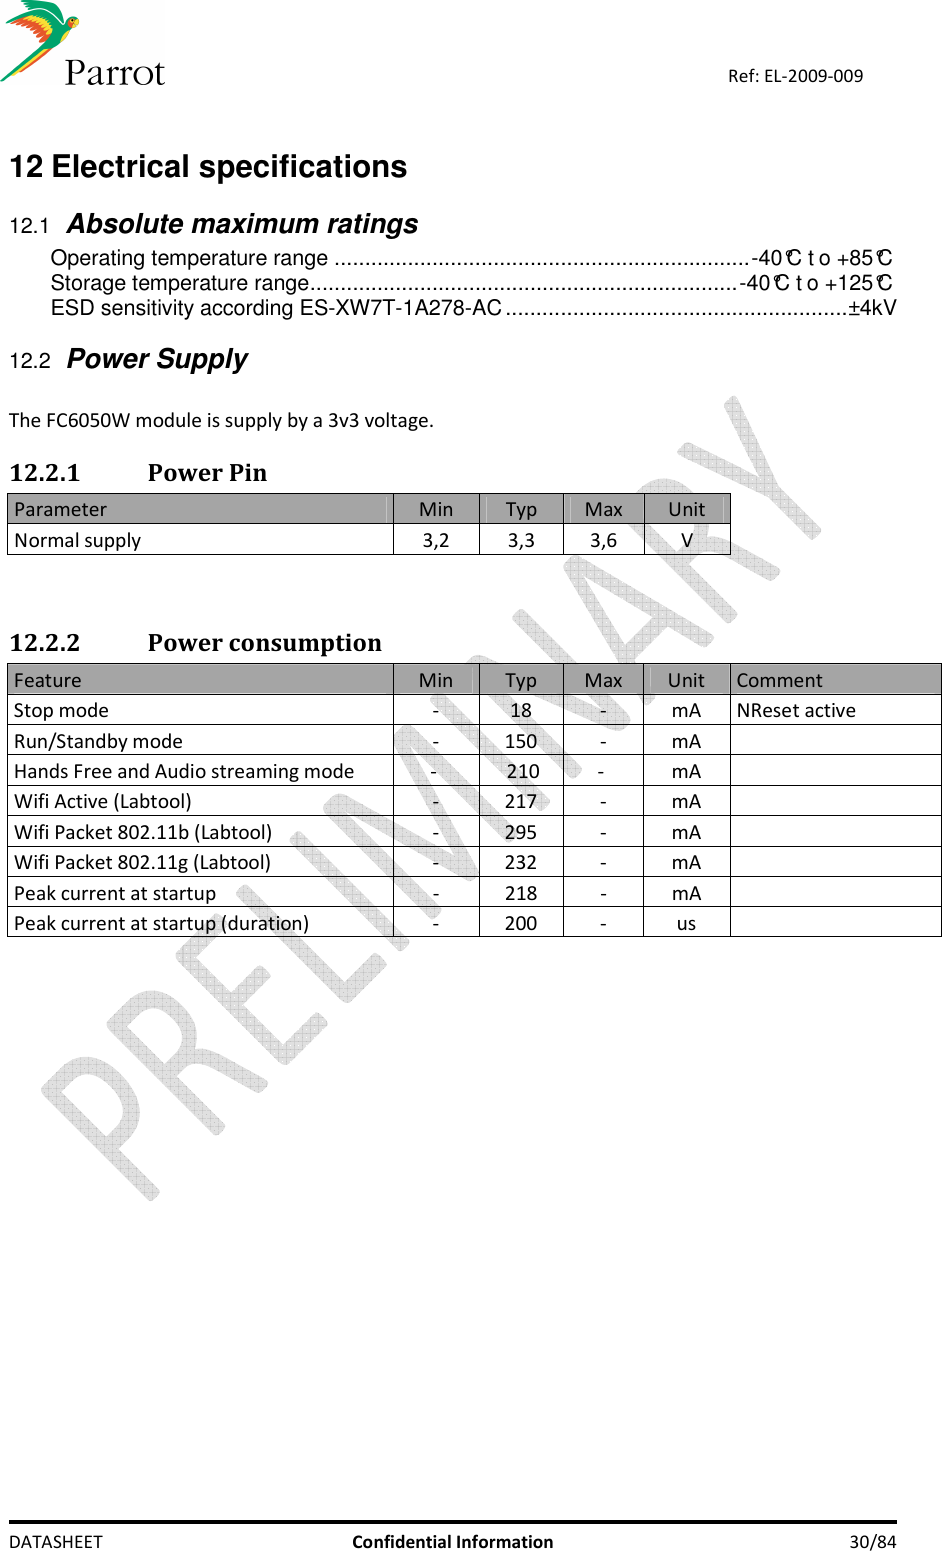    DATASHEET  Confidential Information  30/84 Ref: EL-2009-009  12 Electrical specifications  12.1 Absolute maximum ratings Operating temperature range ....................................................................-40°C t o +85°C Storage temperature range......................................................................-40°C t o +125°C ESD sensitivity according ES-XW7T-1A278-AC........................................................±4kV  12.2 Power Supply  The FC6050W module is supply by a 3v3 voltage.  12.2.1 Power Pin Parameter  Min  Typ  Max  Unit Normal supply  3,2  3,3  3,6  V   12.2.2 Power consumption Feature  Min  Typ  Max  Unit  Comment Stop mode  -  18  -  mA  NReset active Run/Standby mode  -  150  -  mA    Hands Free and Audio streaming mode  -    210  -   mA    Wifi Active (Labtool)  -  217  -  mA    Wifi Packet 802.11b (Labtool)  -  295  -  mA    Wifi Packet 802.11g (Labtool)  -  232  -  mA    Peak current at startup  -  218  -  mA    Peak current at startup (duration)  -  200  -  us      